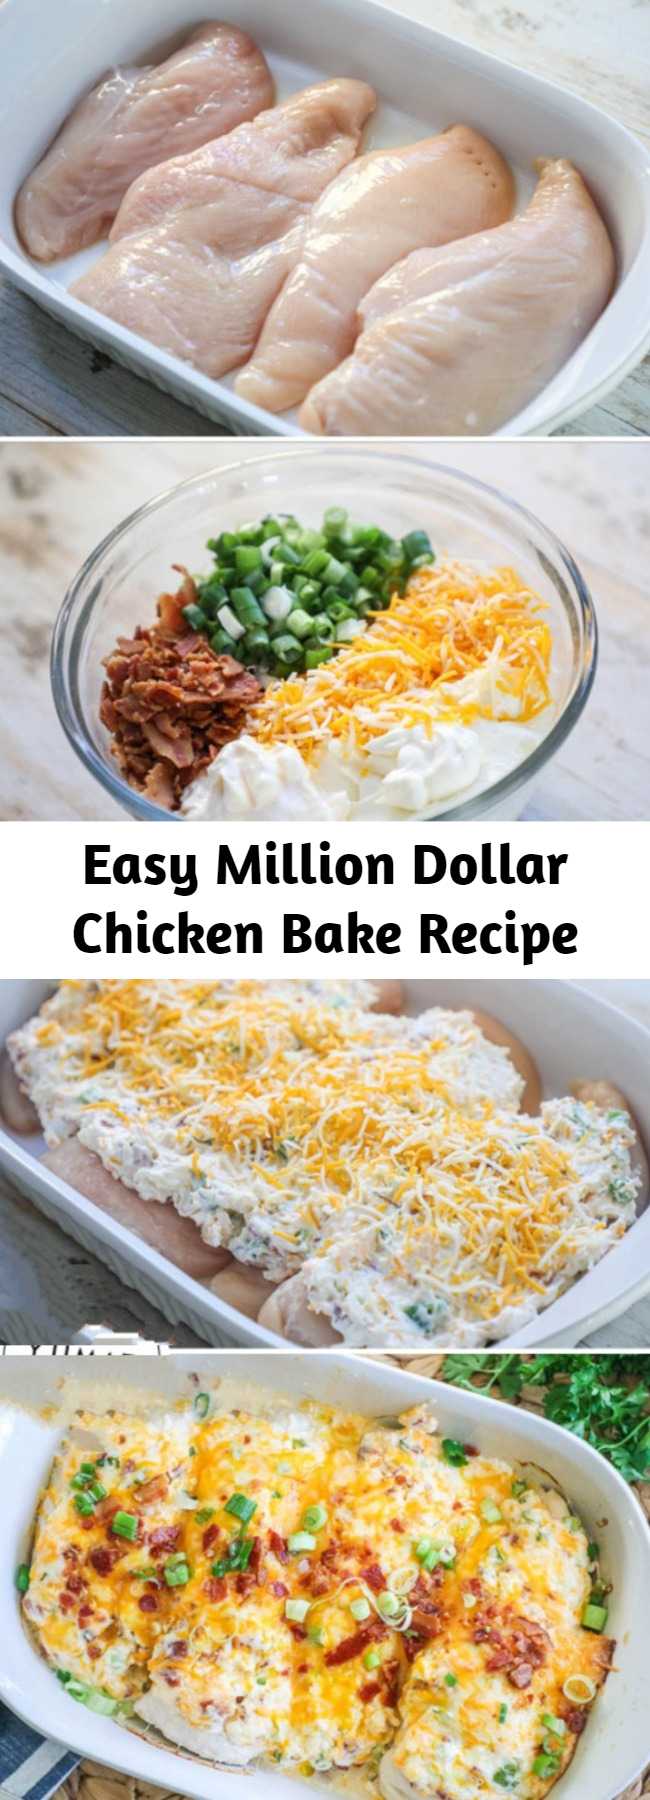 Easy Million Dollar Chicken Bake Recipe - This Million Dollar Chicken makes baked chicken breast exciting again! Packed with rich, bold flavors, this one dish meal is a family favorite!